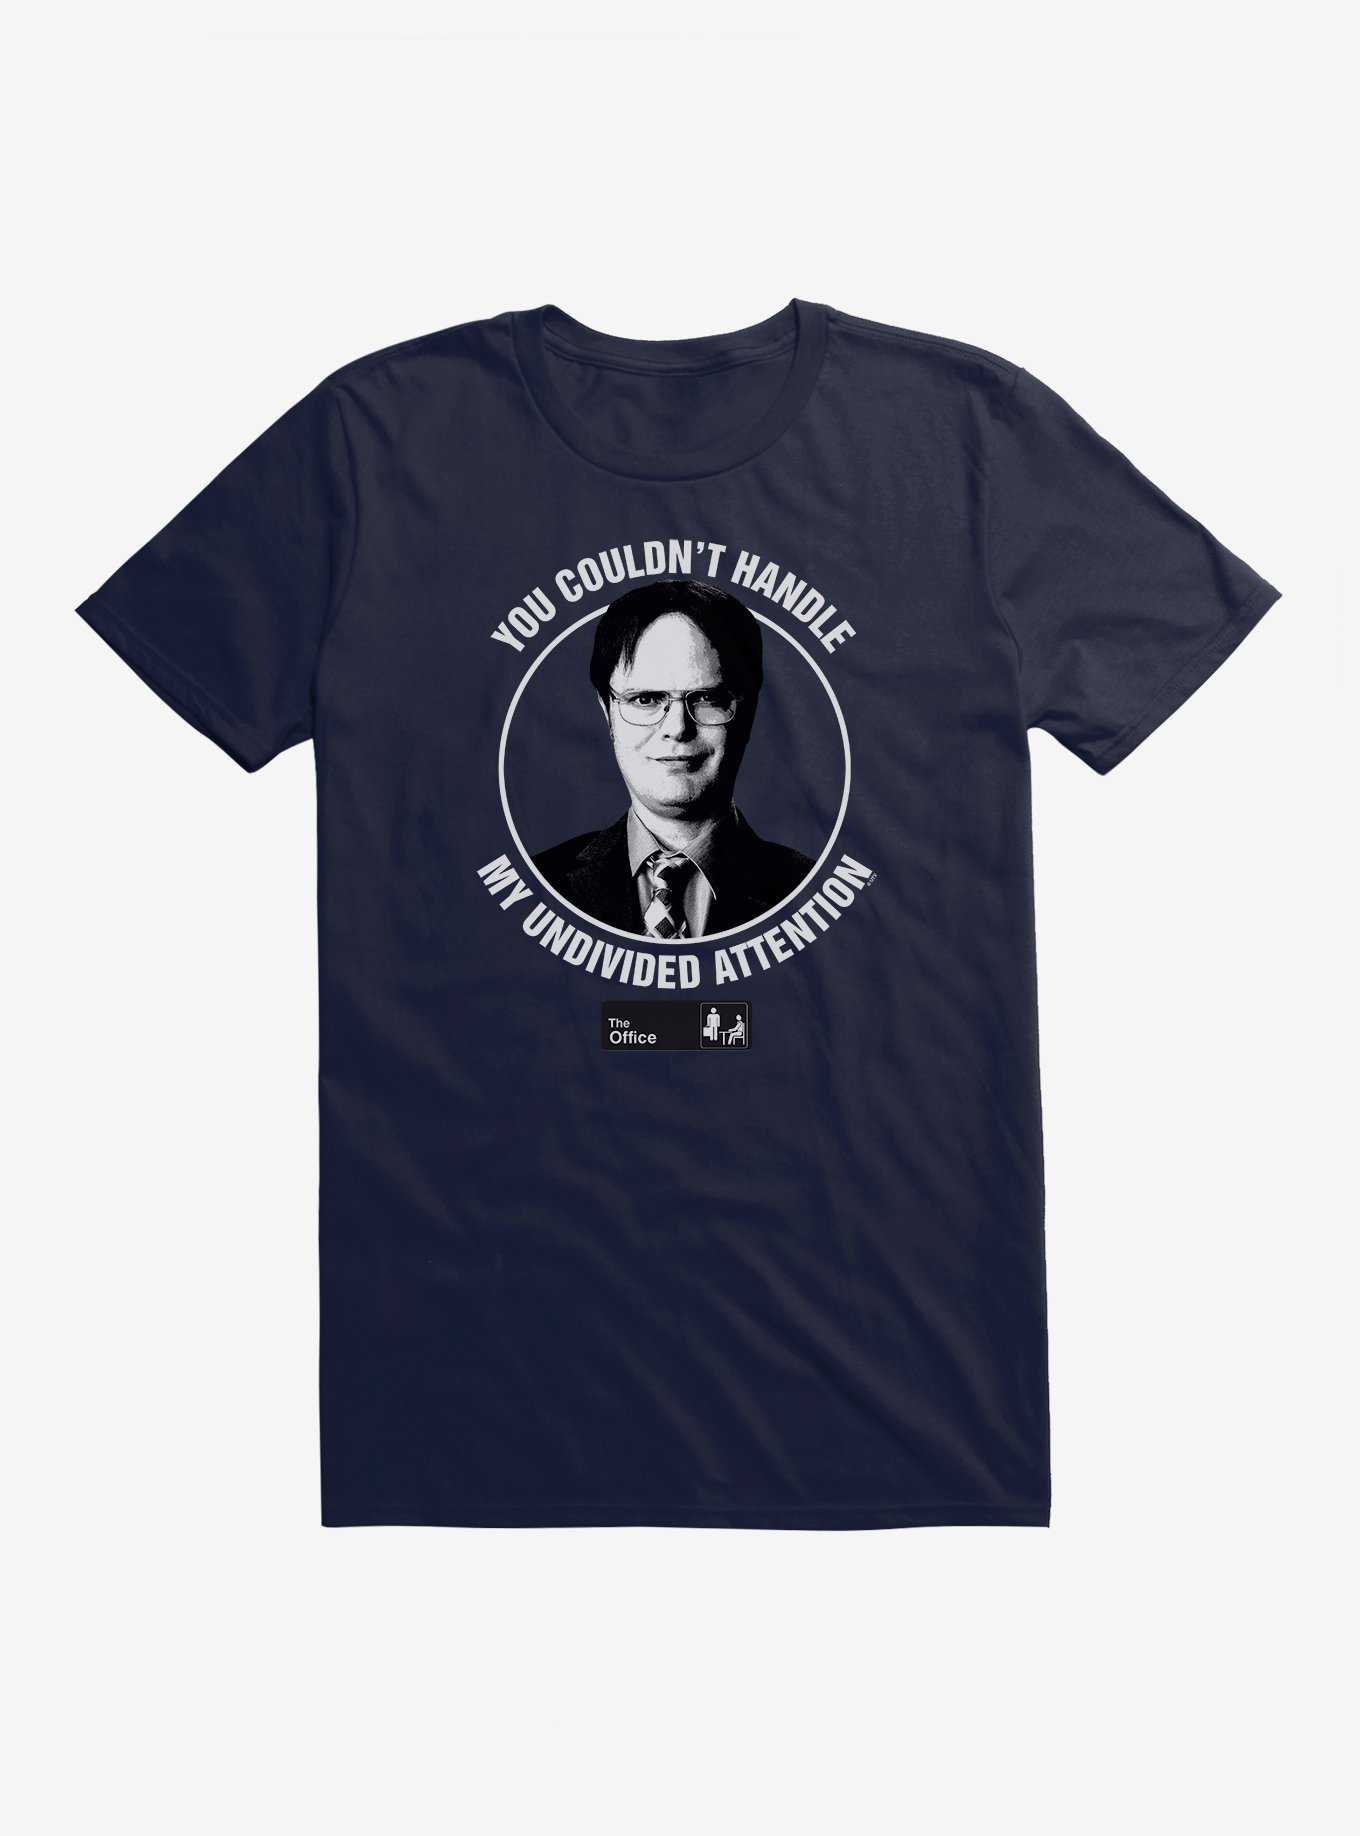 The Office T-shirts - You Are The Dwight To My Michael T-shirt | The Office  Merch Shop